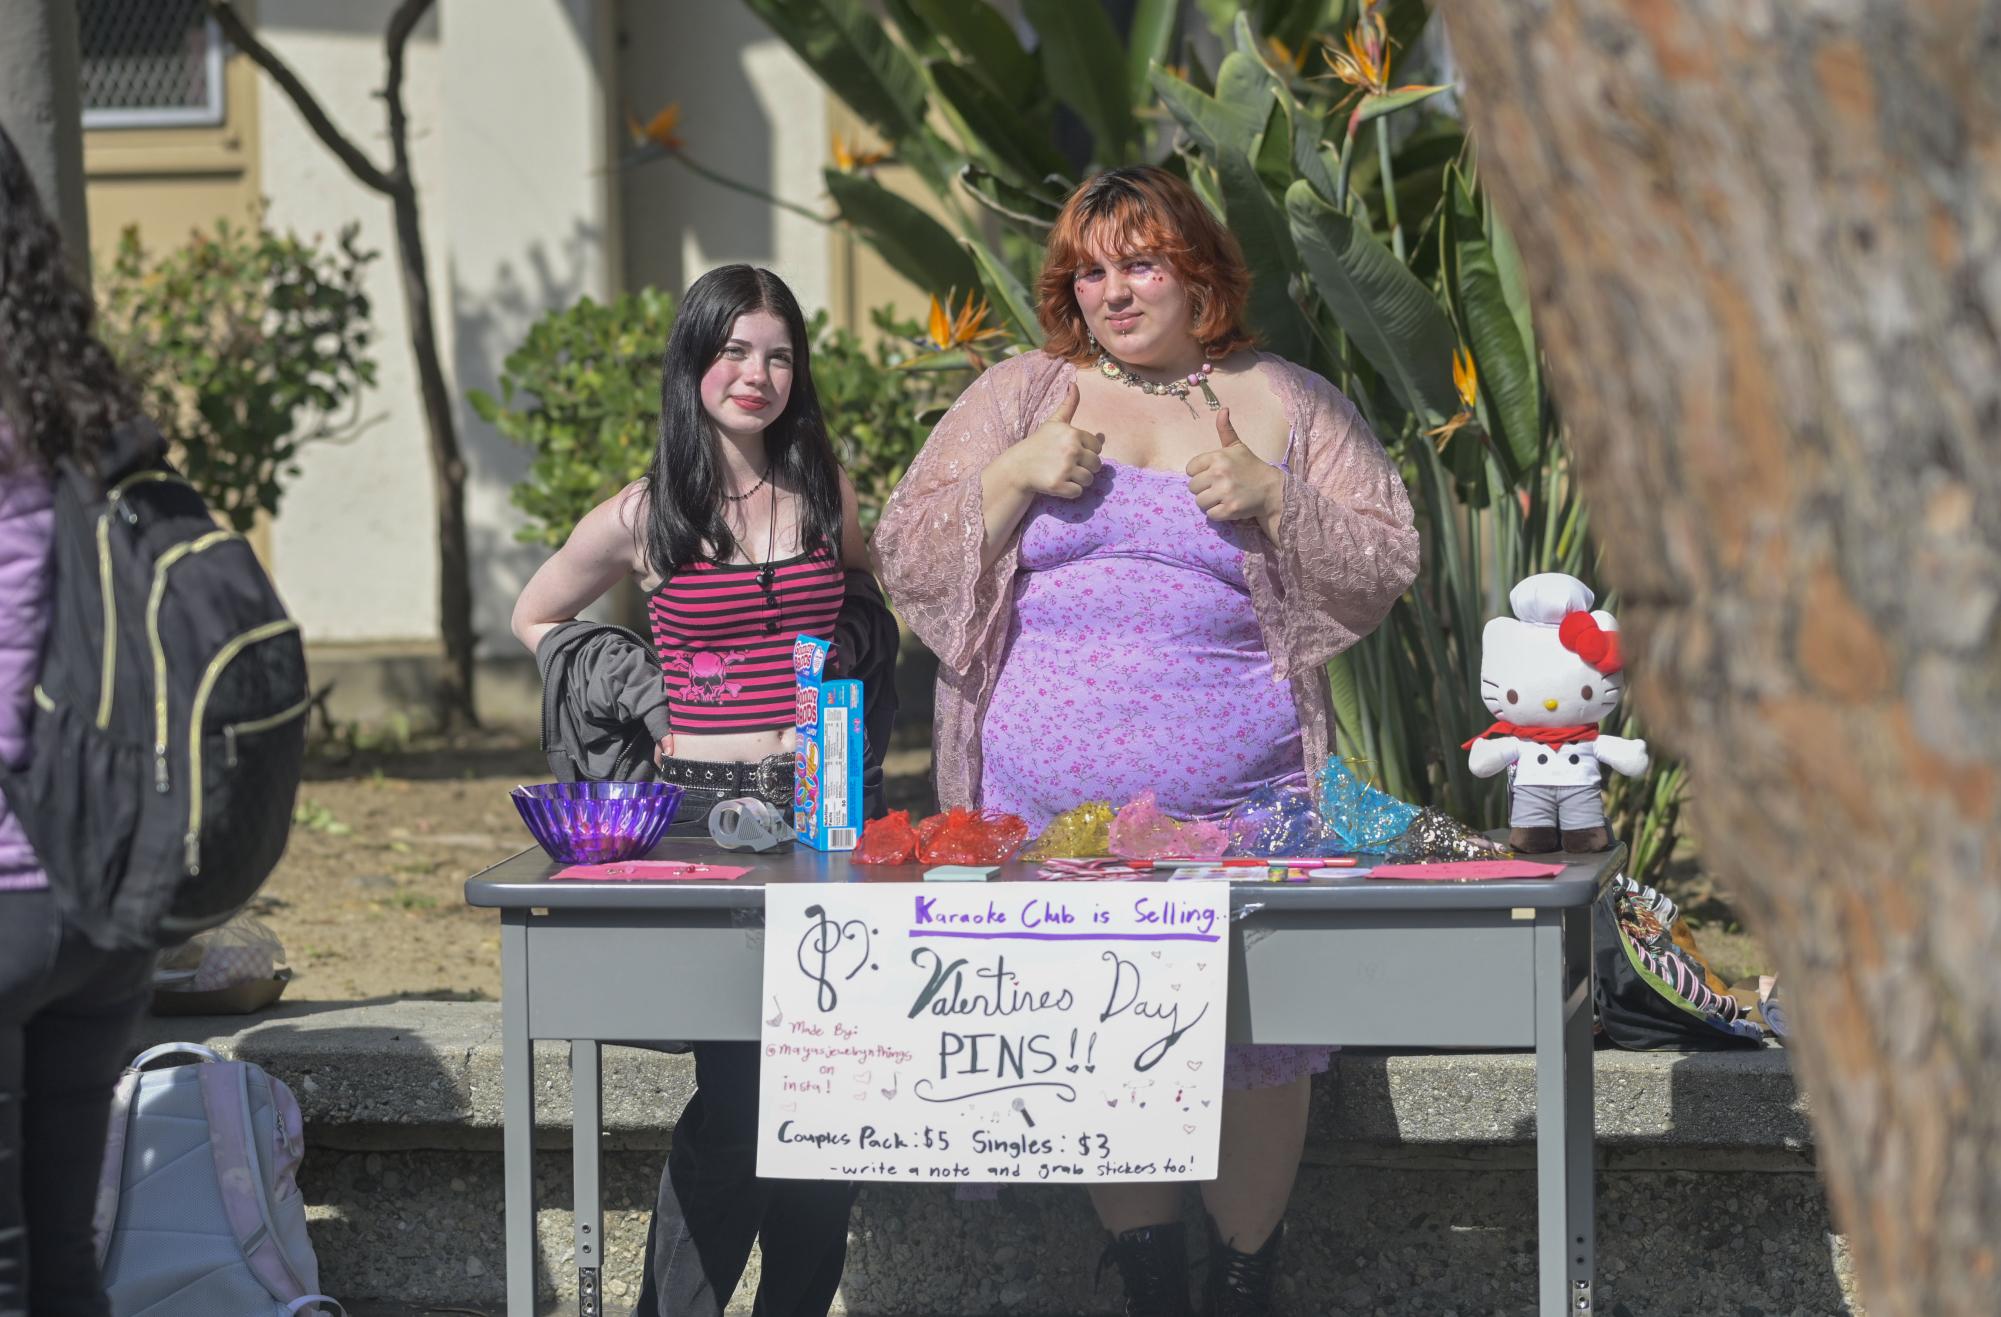 Hanna Berson (L) and Maya Diaz sell Valentines Day pins to promote and fund the Karaoke Club.